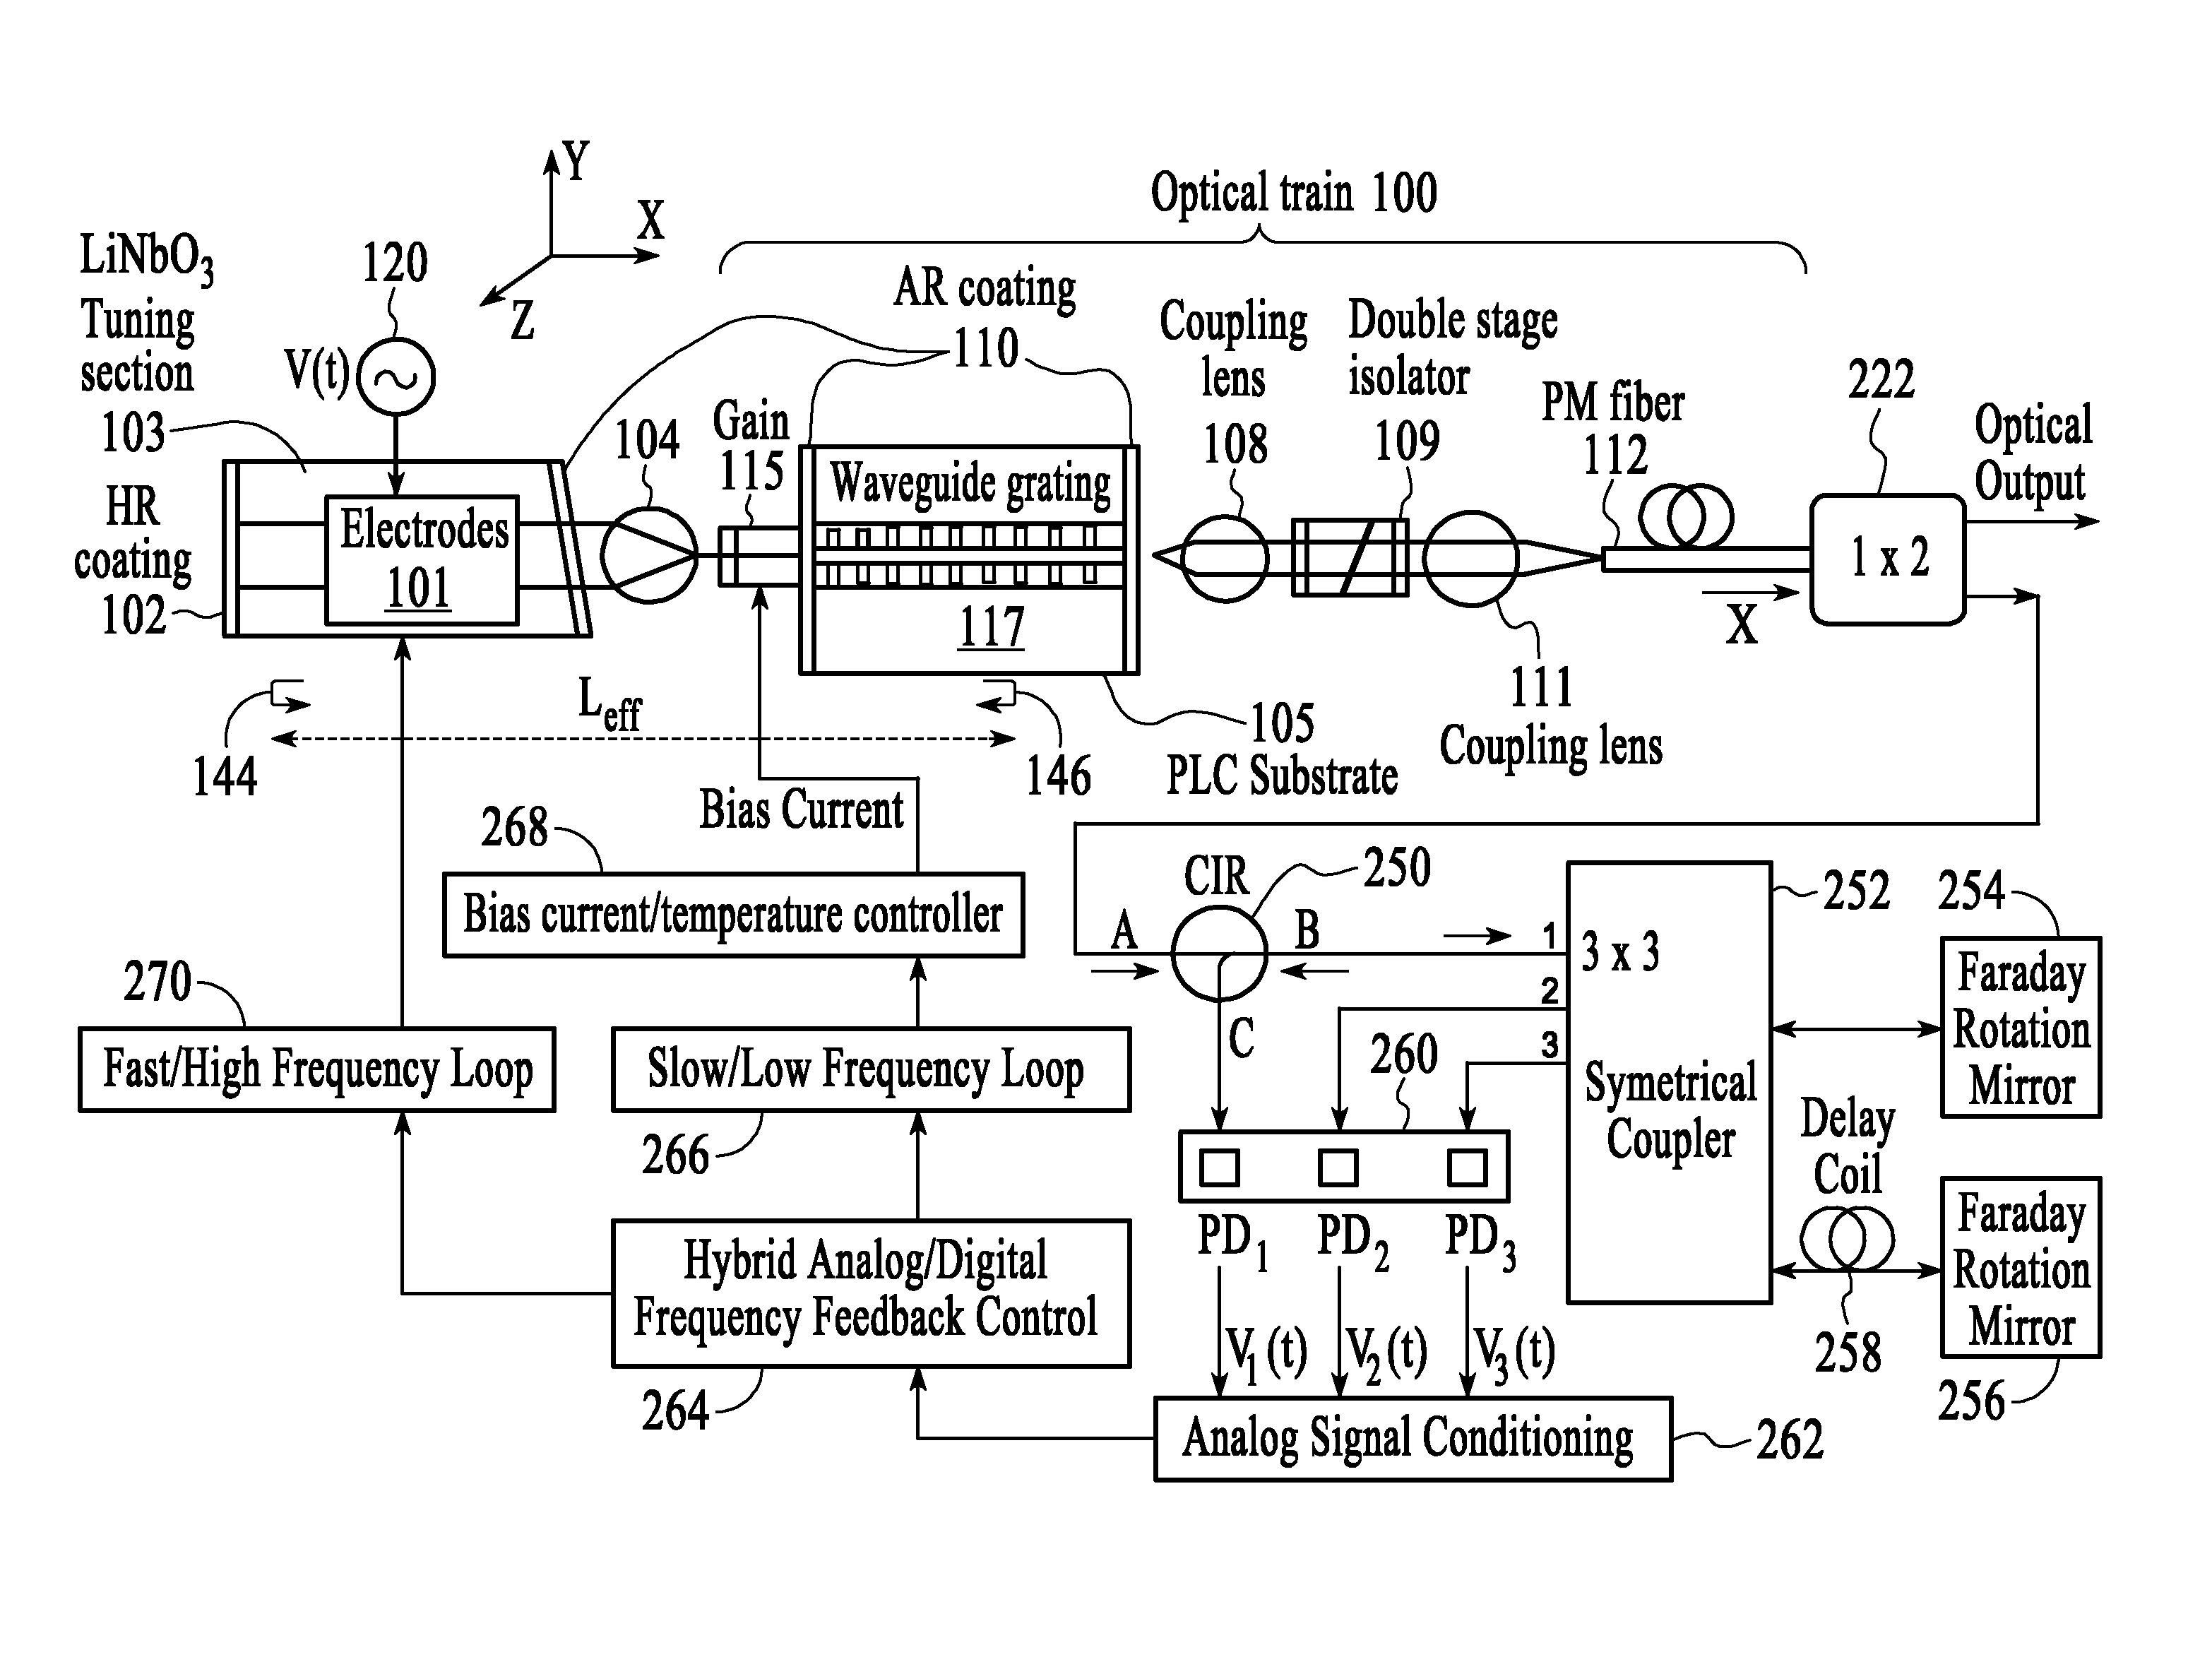 Ultra-low frequency noise external cavity semiconductor laser with integrated waveguide grating and modulation section electronically stabilized by dual frequency feedback control circuitry